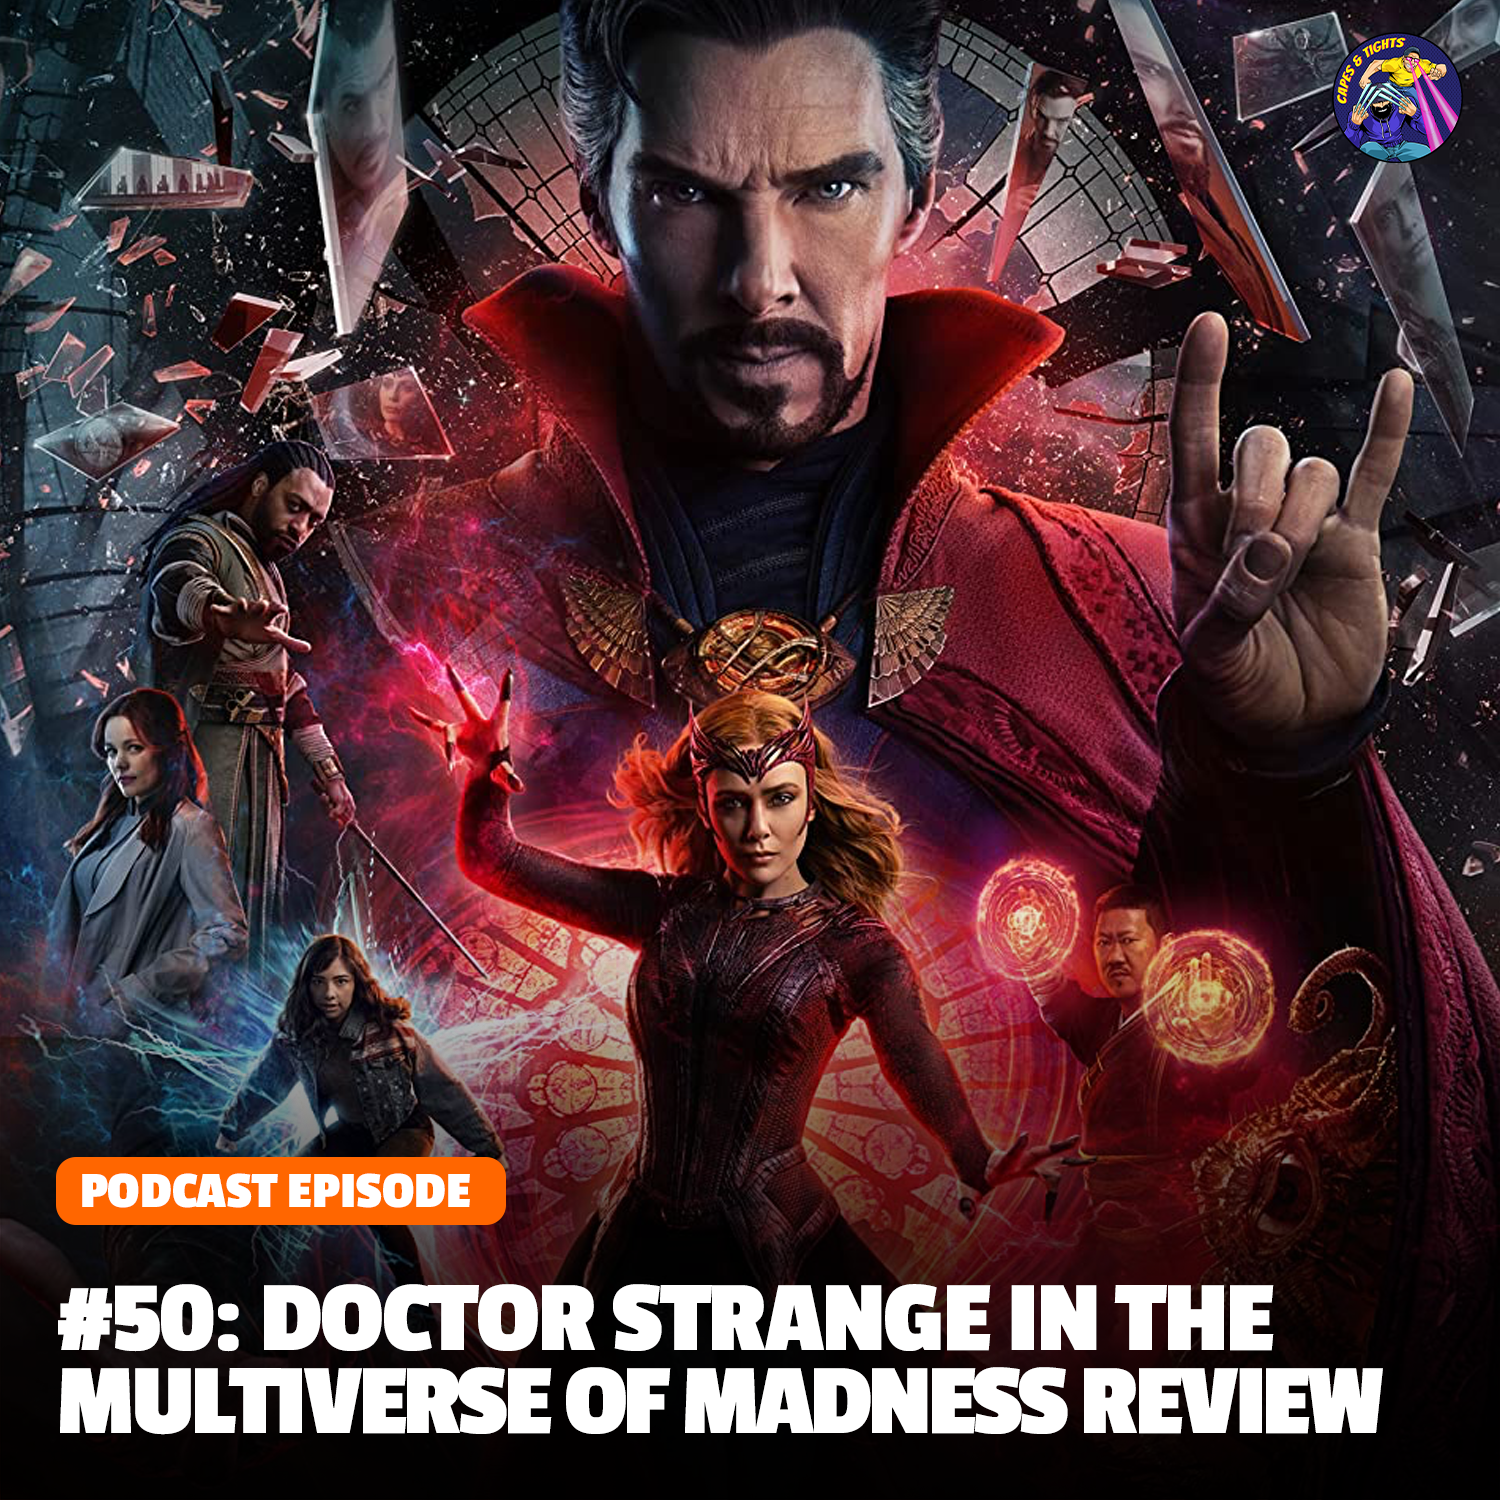 #50: Doctor Strange In The Multiverse of Madness Review